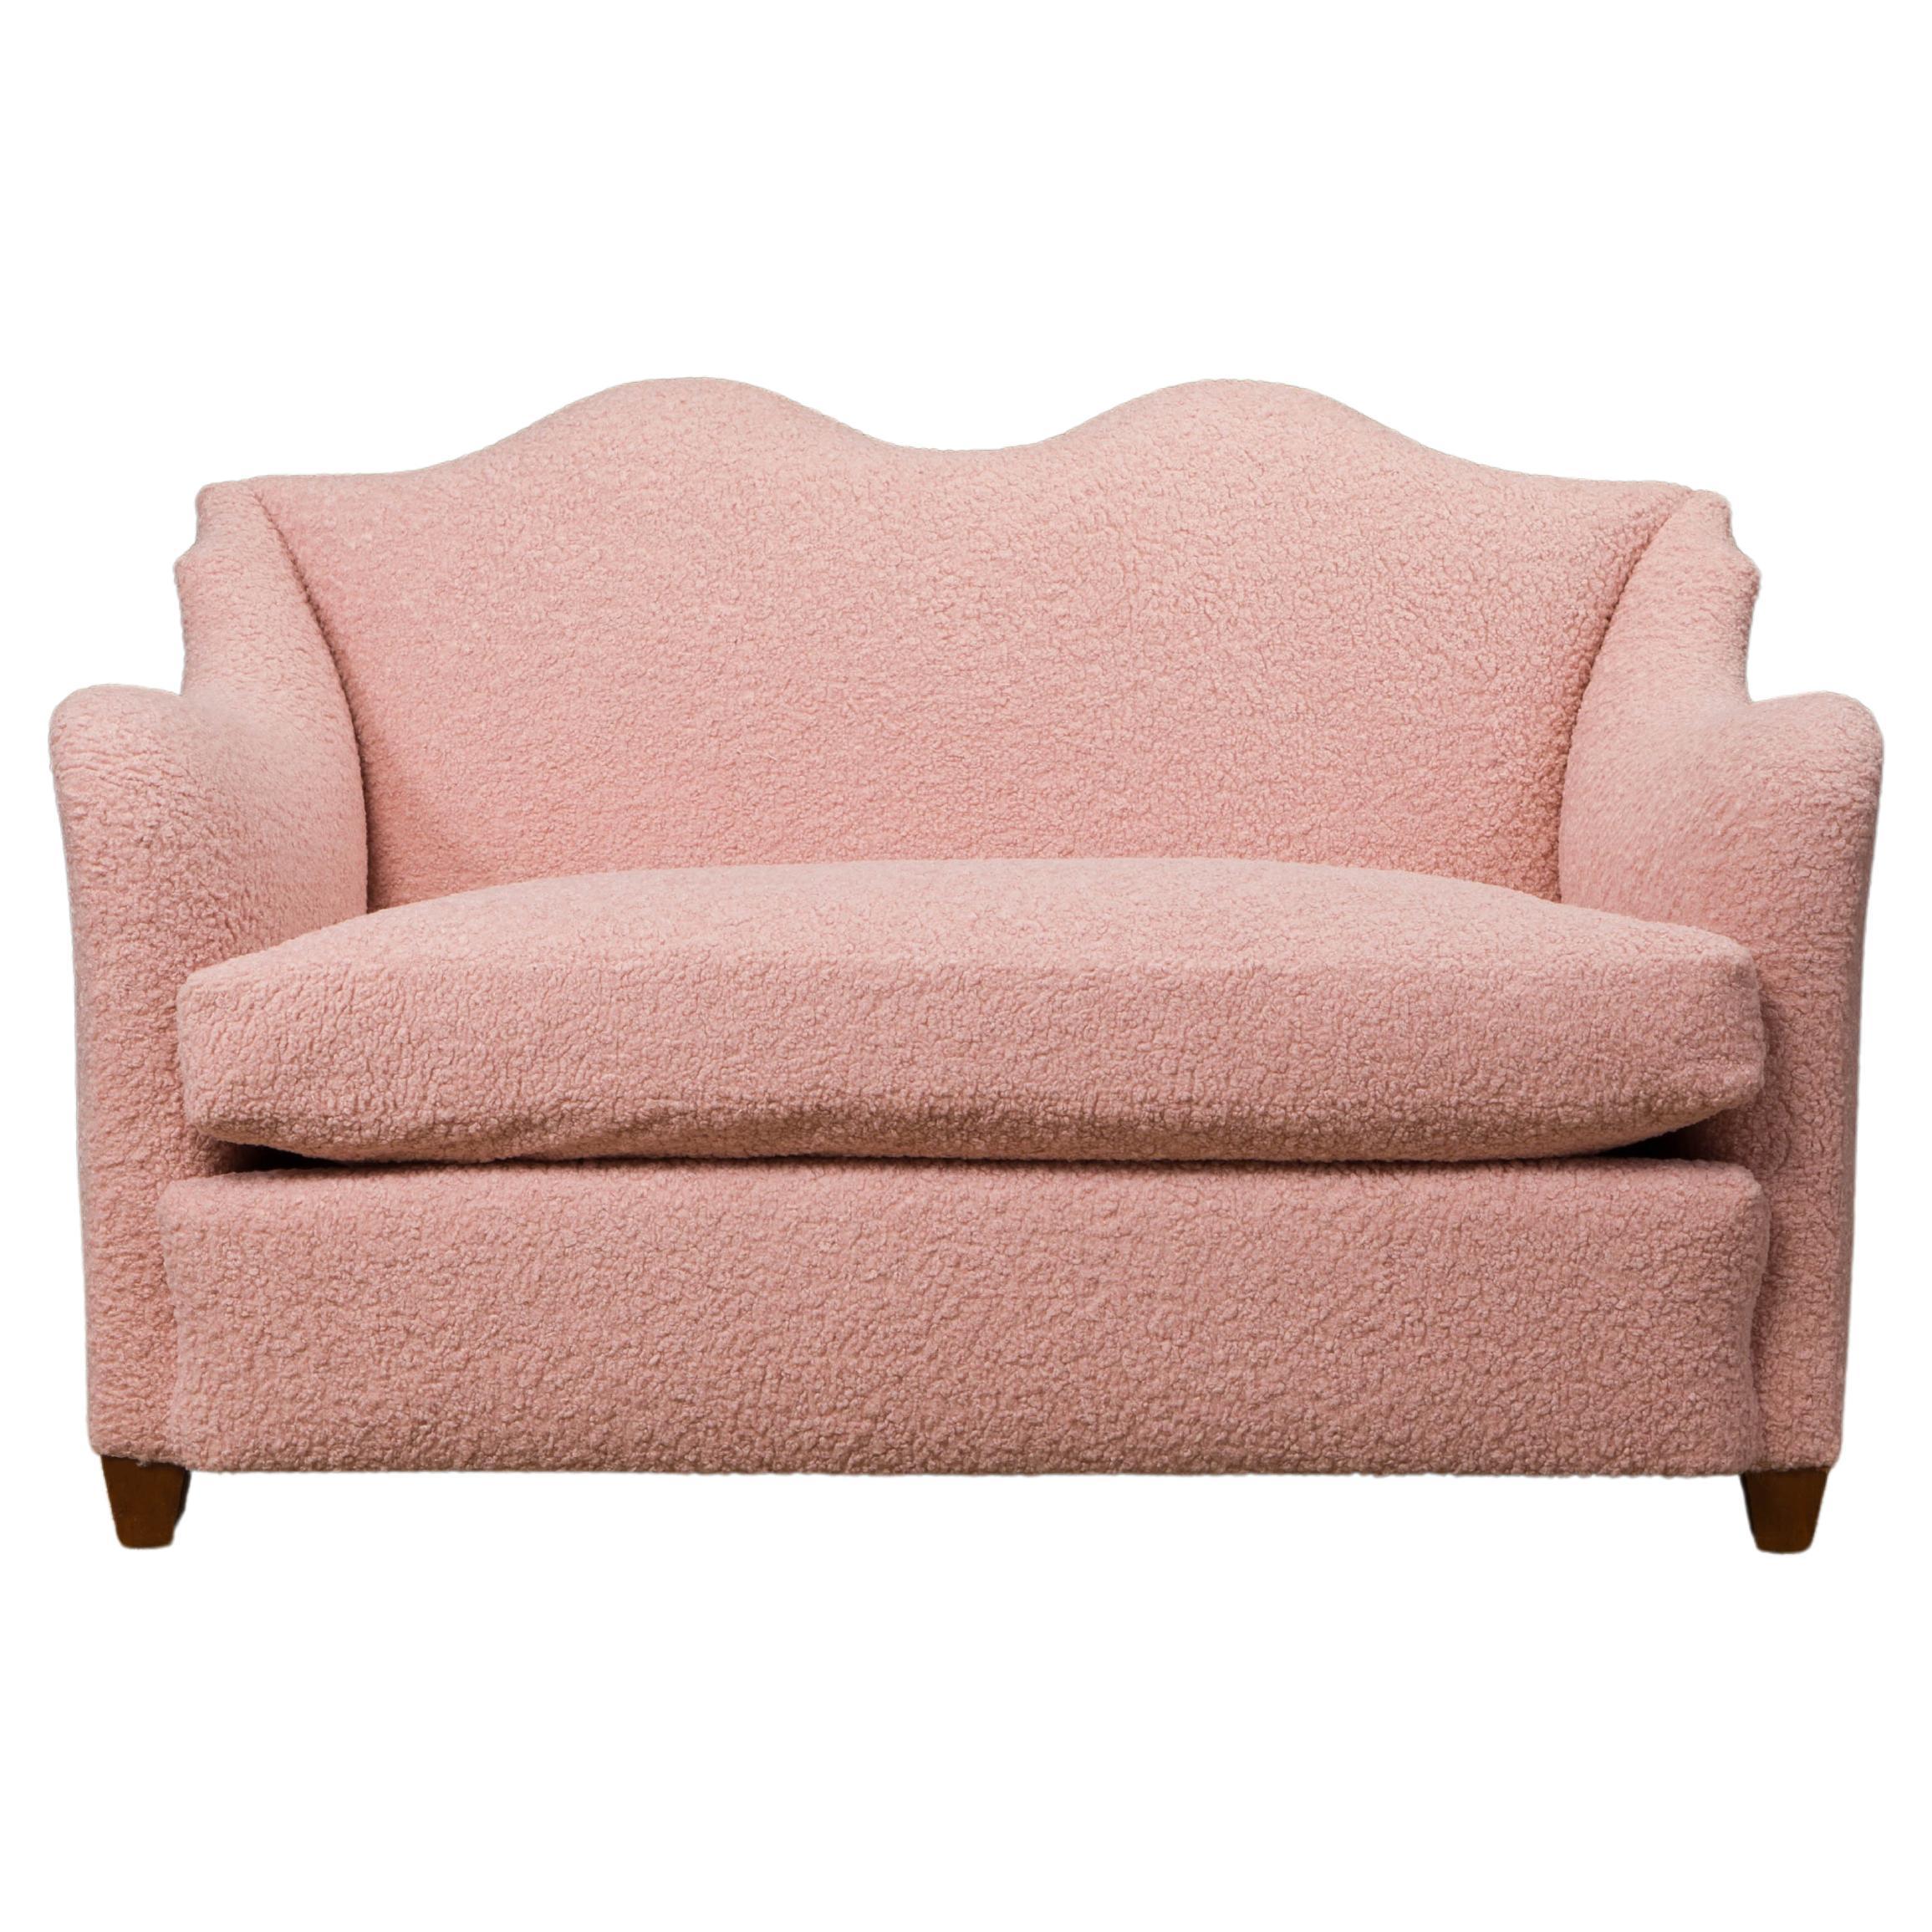 Important Maison Jansen Loveseat Reupholstered in Pink Bouclé, c. 1930s, Signed  For Sale